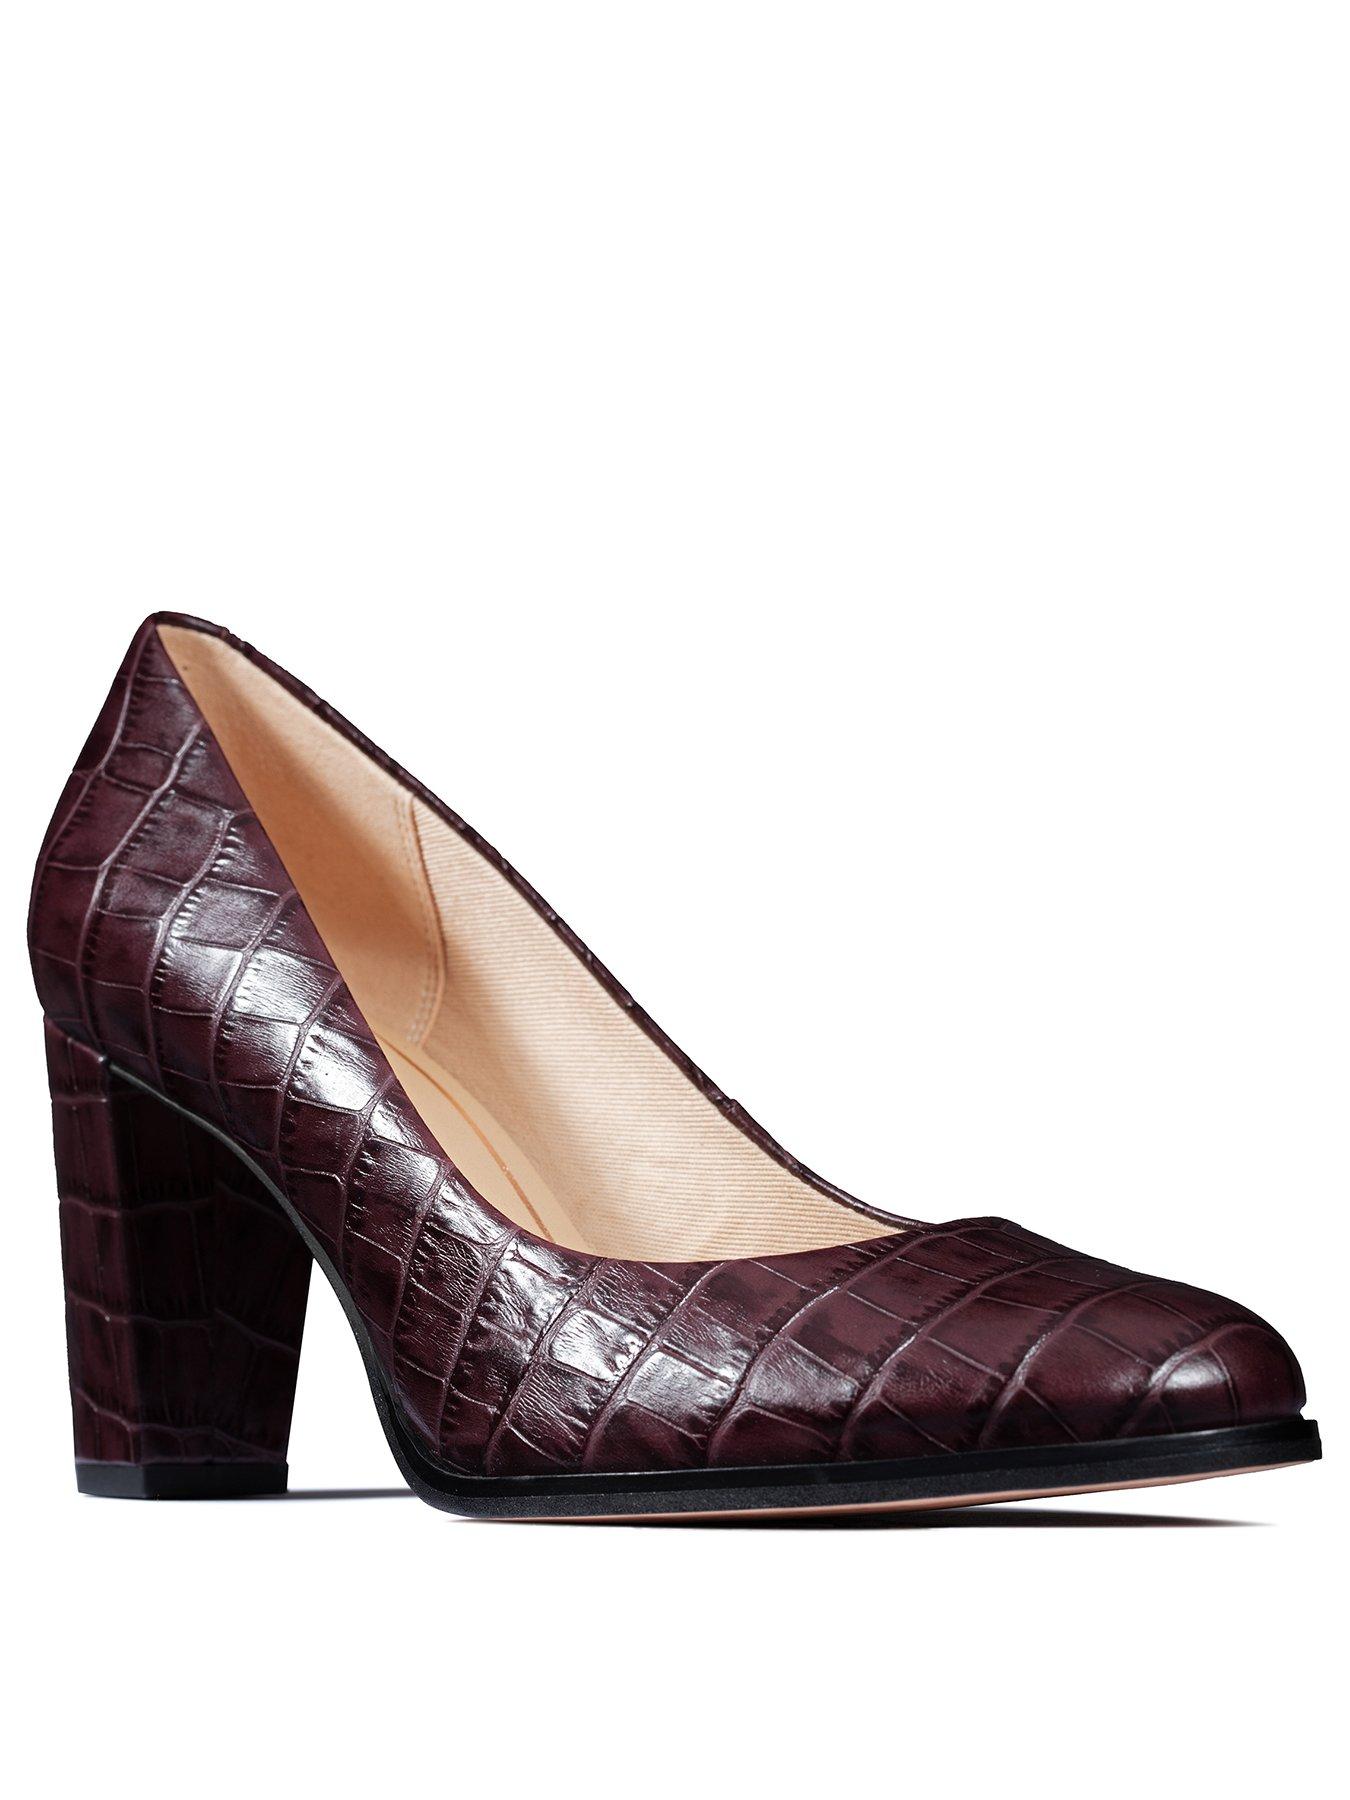 clarks womens shoes on clearance